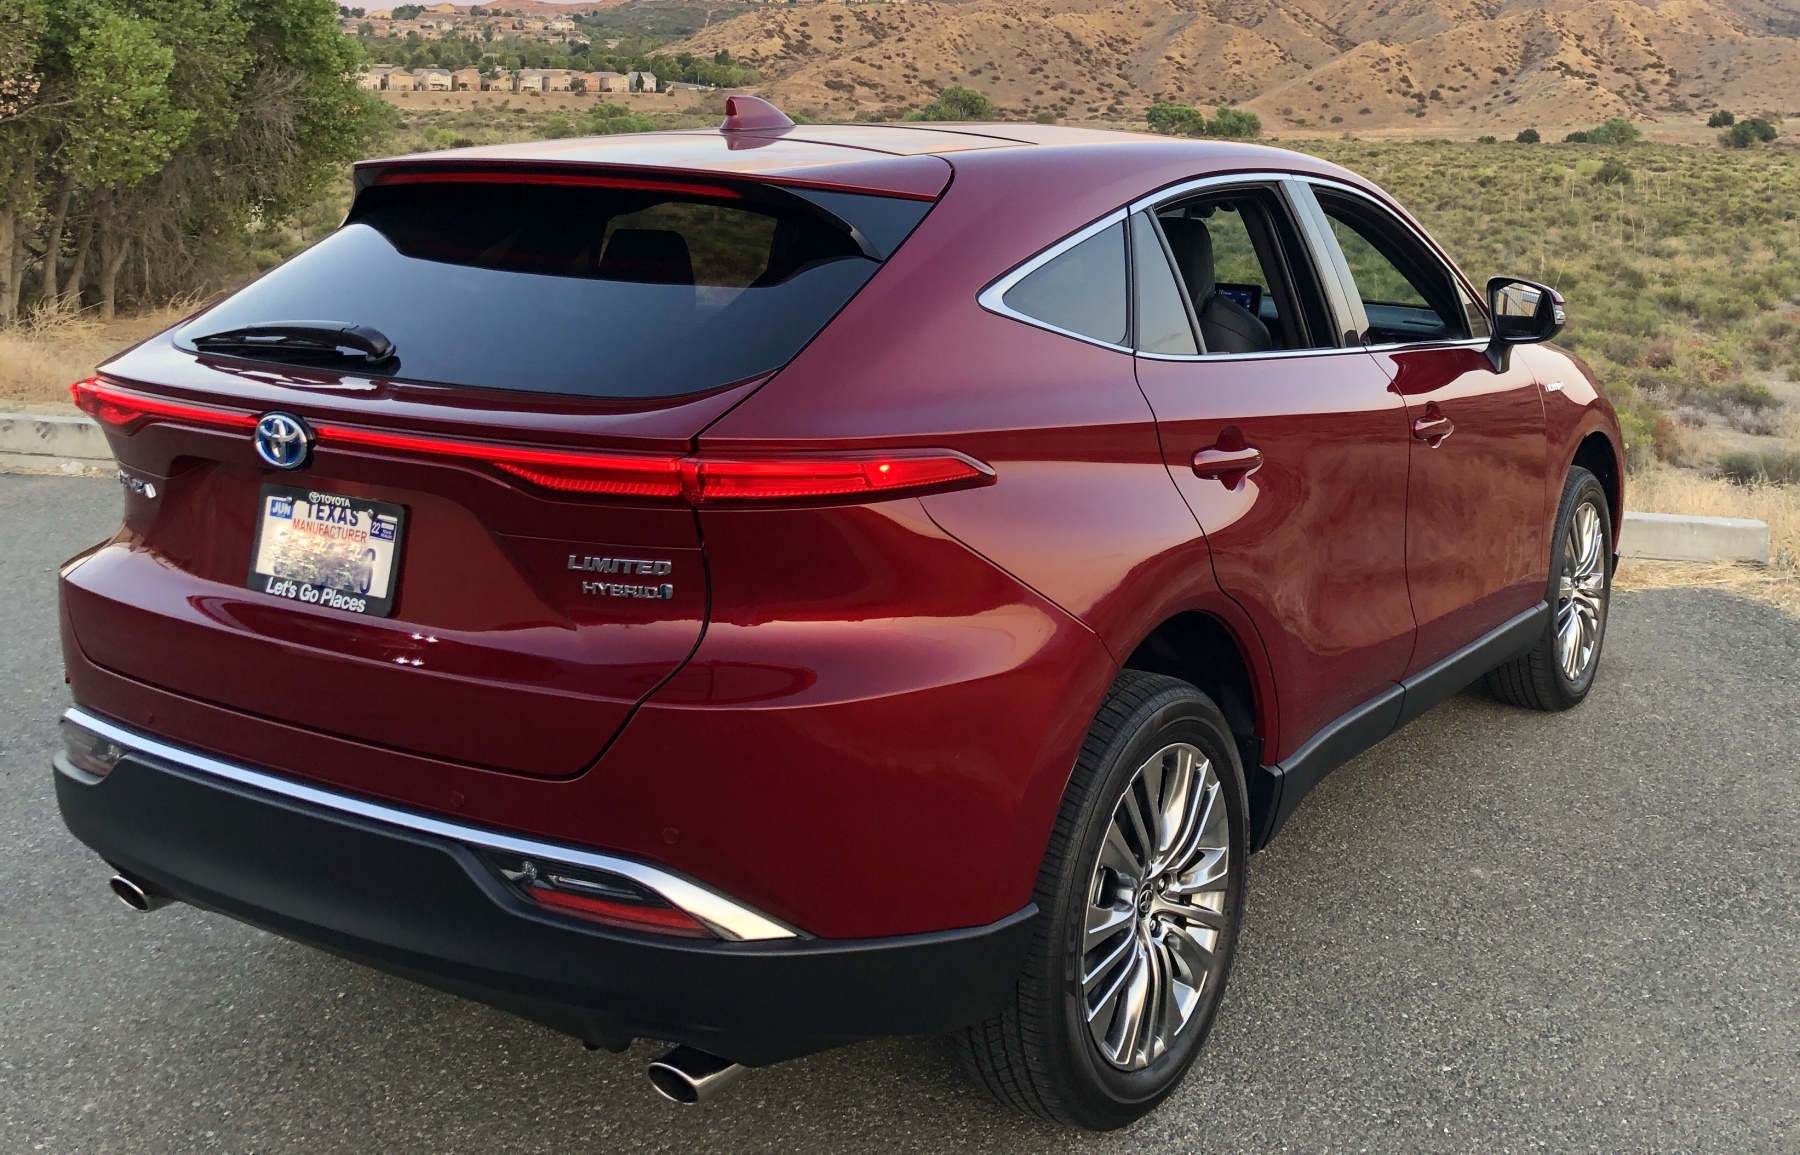 2021 Toyota Venza Hybrid Review Consumer Reports All In One Photos